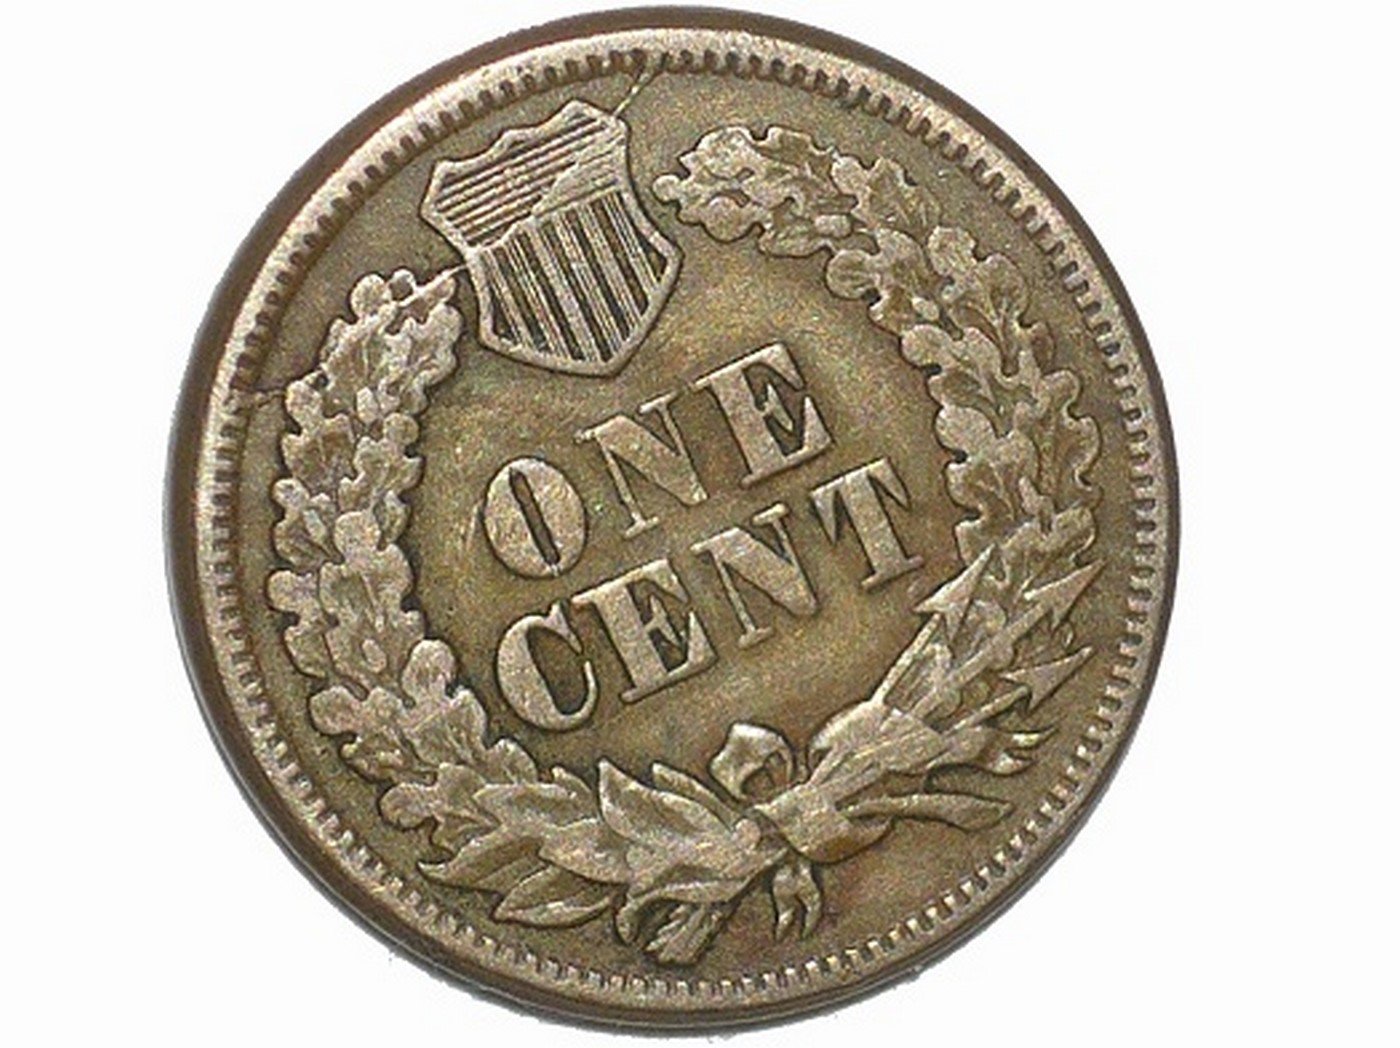 1863 CRK-003 - Indian Head Penny - Photo by David Poliquin